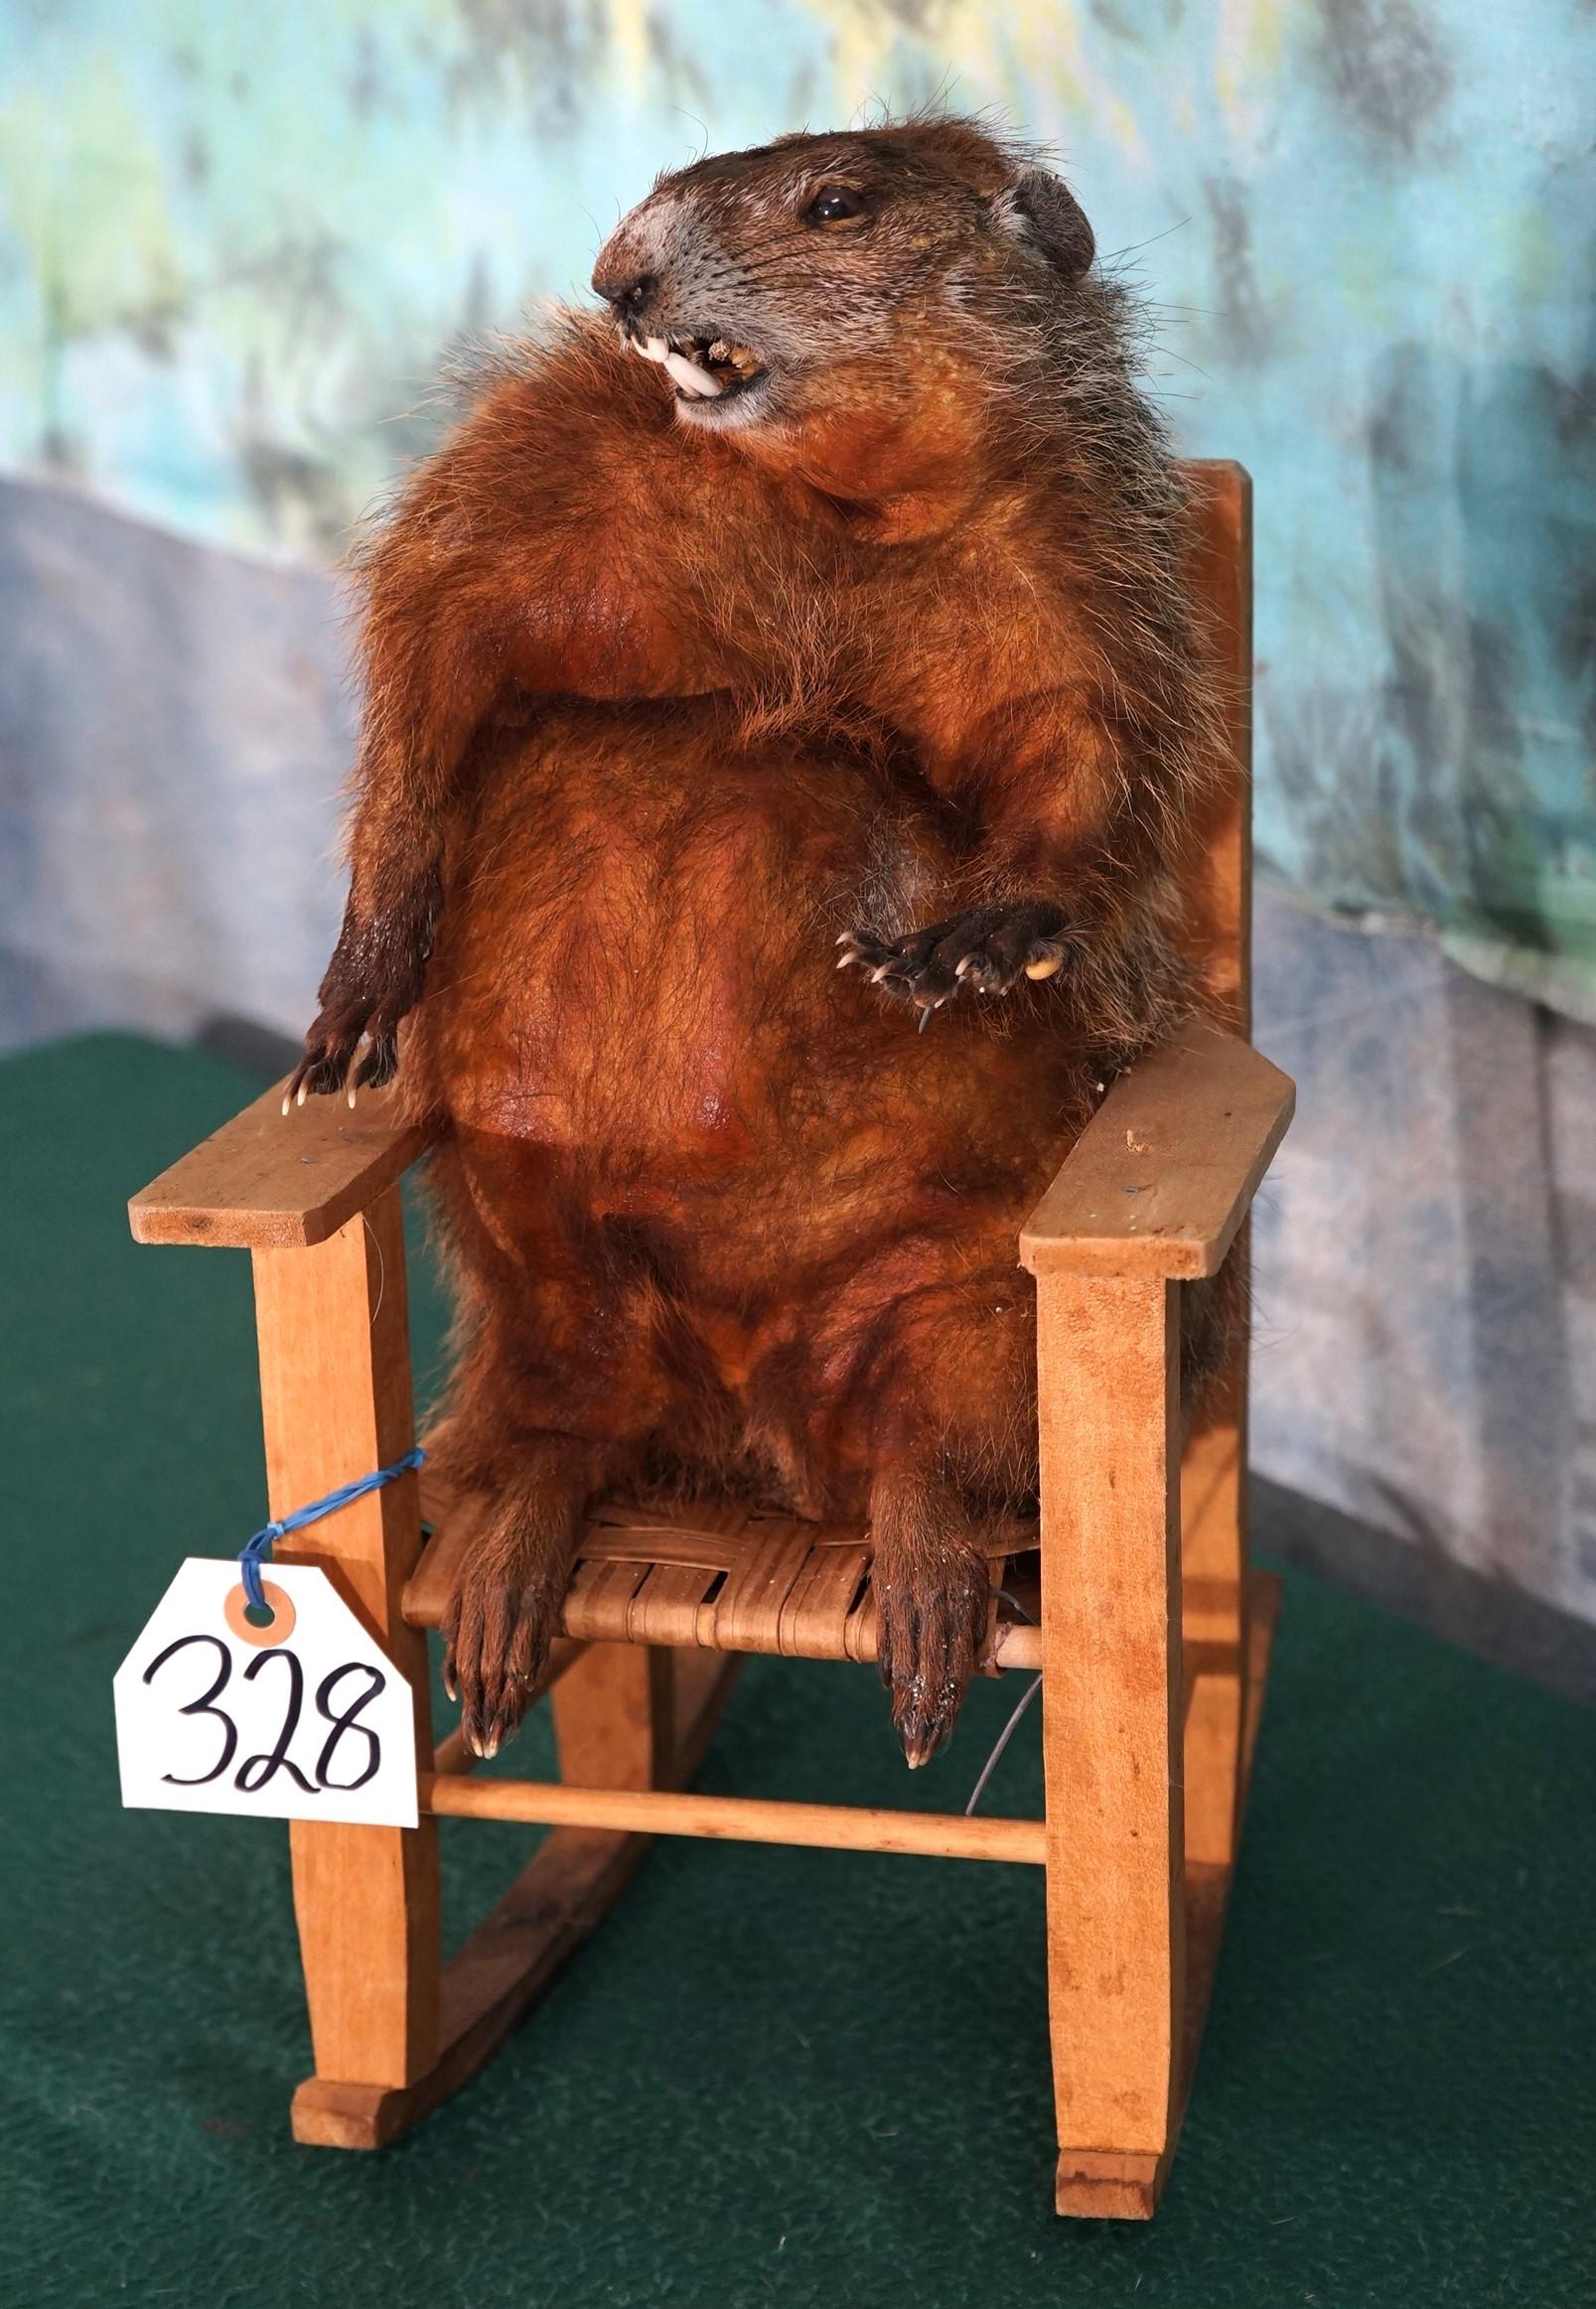 Full Body Mount Wood Chuck in Rocking Chair Novelty Taxidermy Mount